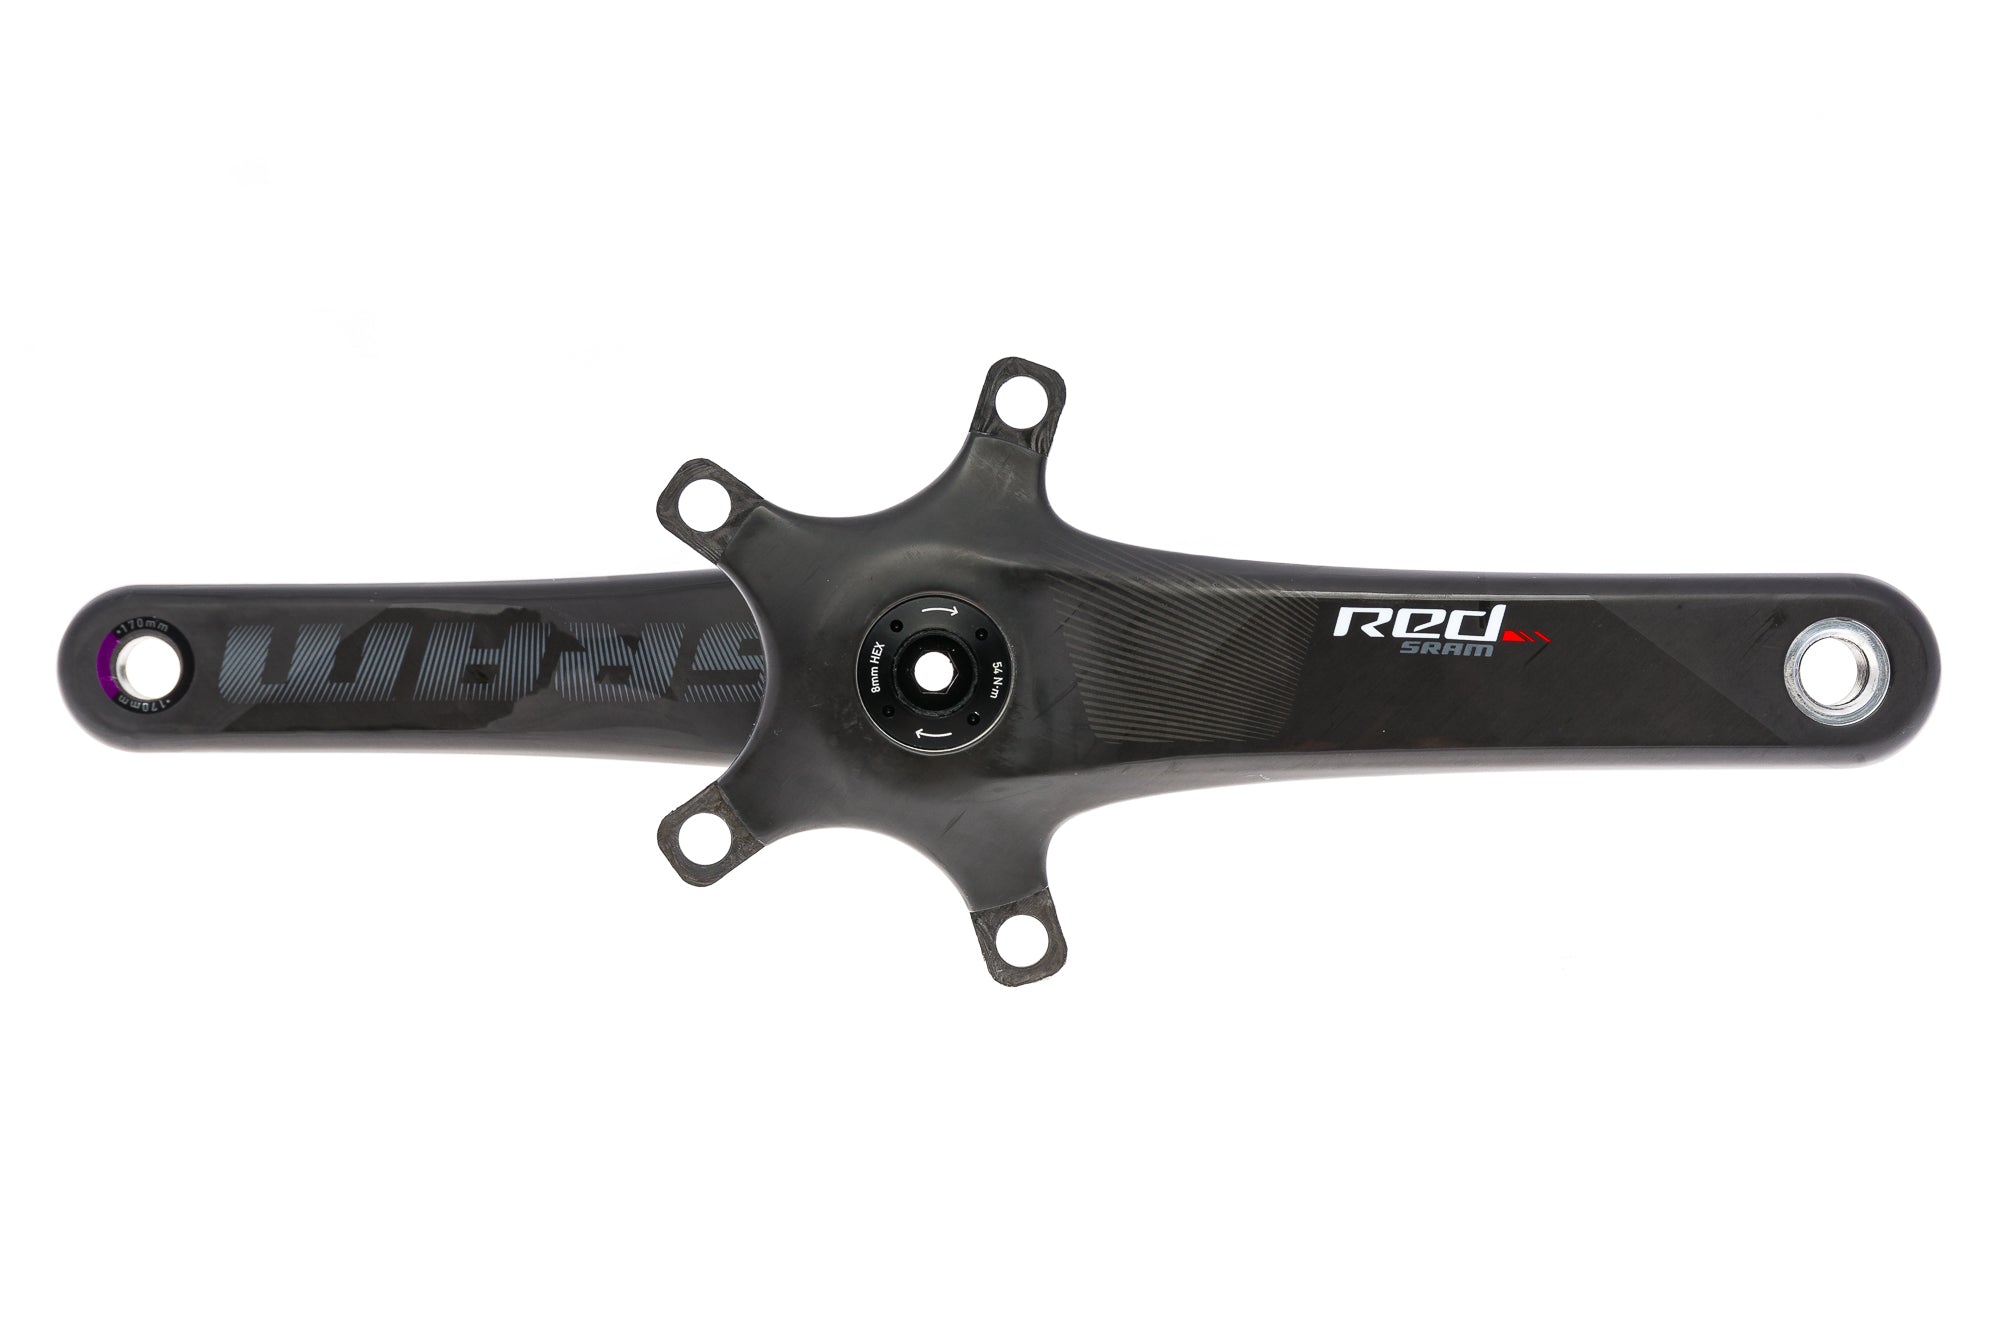 SRAM Red Crank Arms 11 Speed 170mm 110mm BCD BB30 drive side